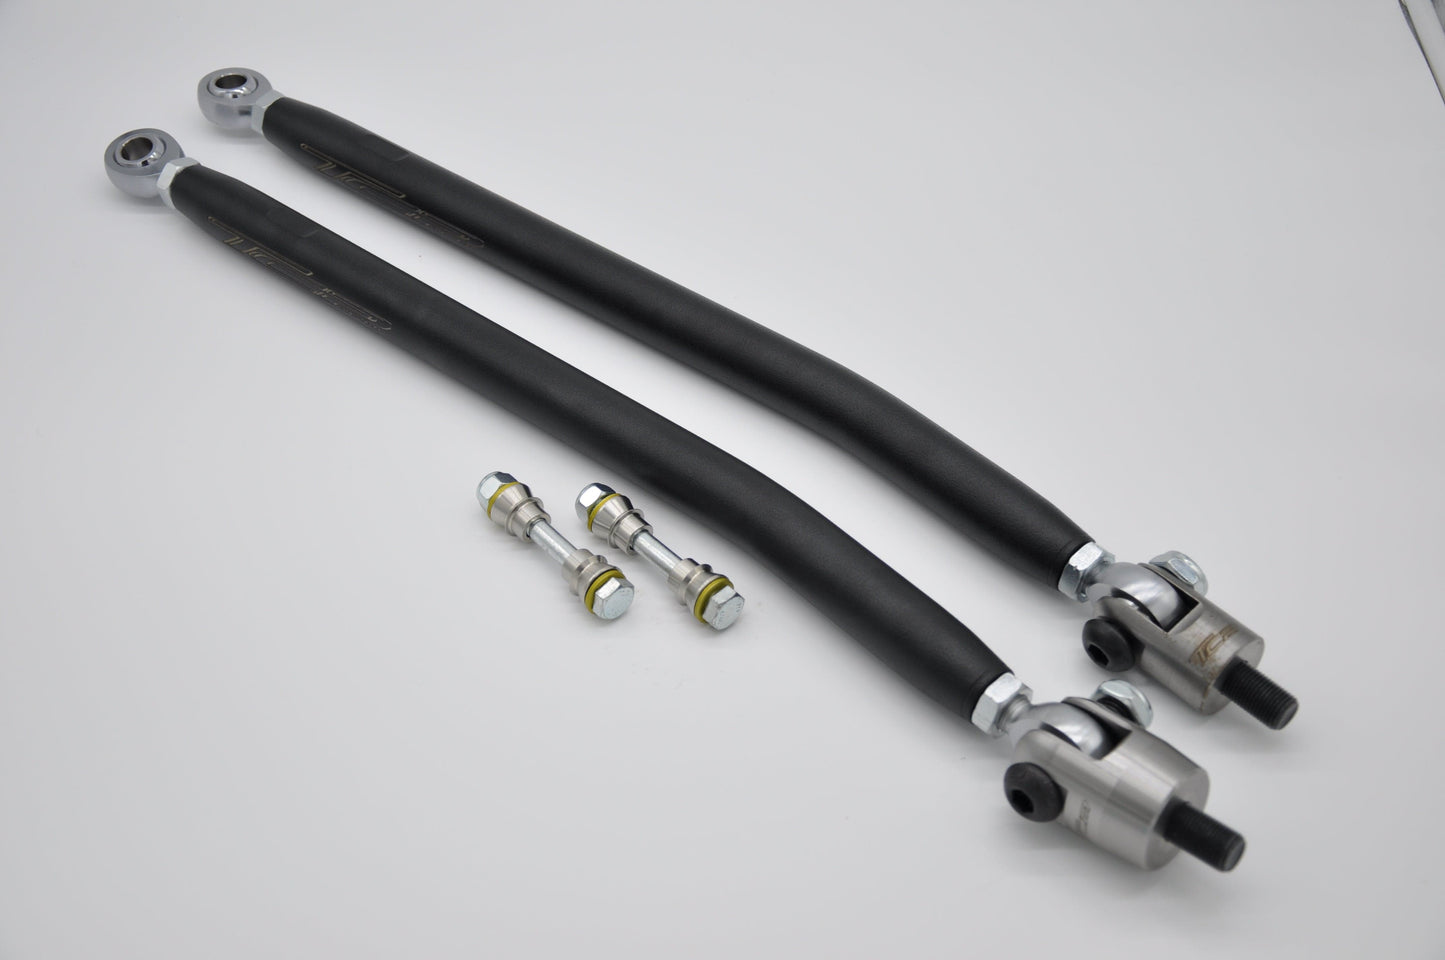 Heavy Duty Tie Rods, Rod Ends, Clevises, and Straight King Pins for Can-Am Defender with SATV +6 Lift (replaces SATV 20" Z Bar)